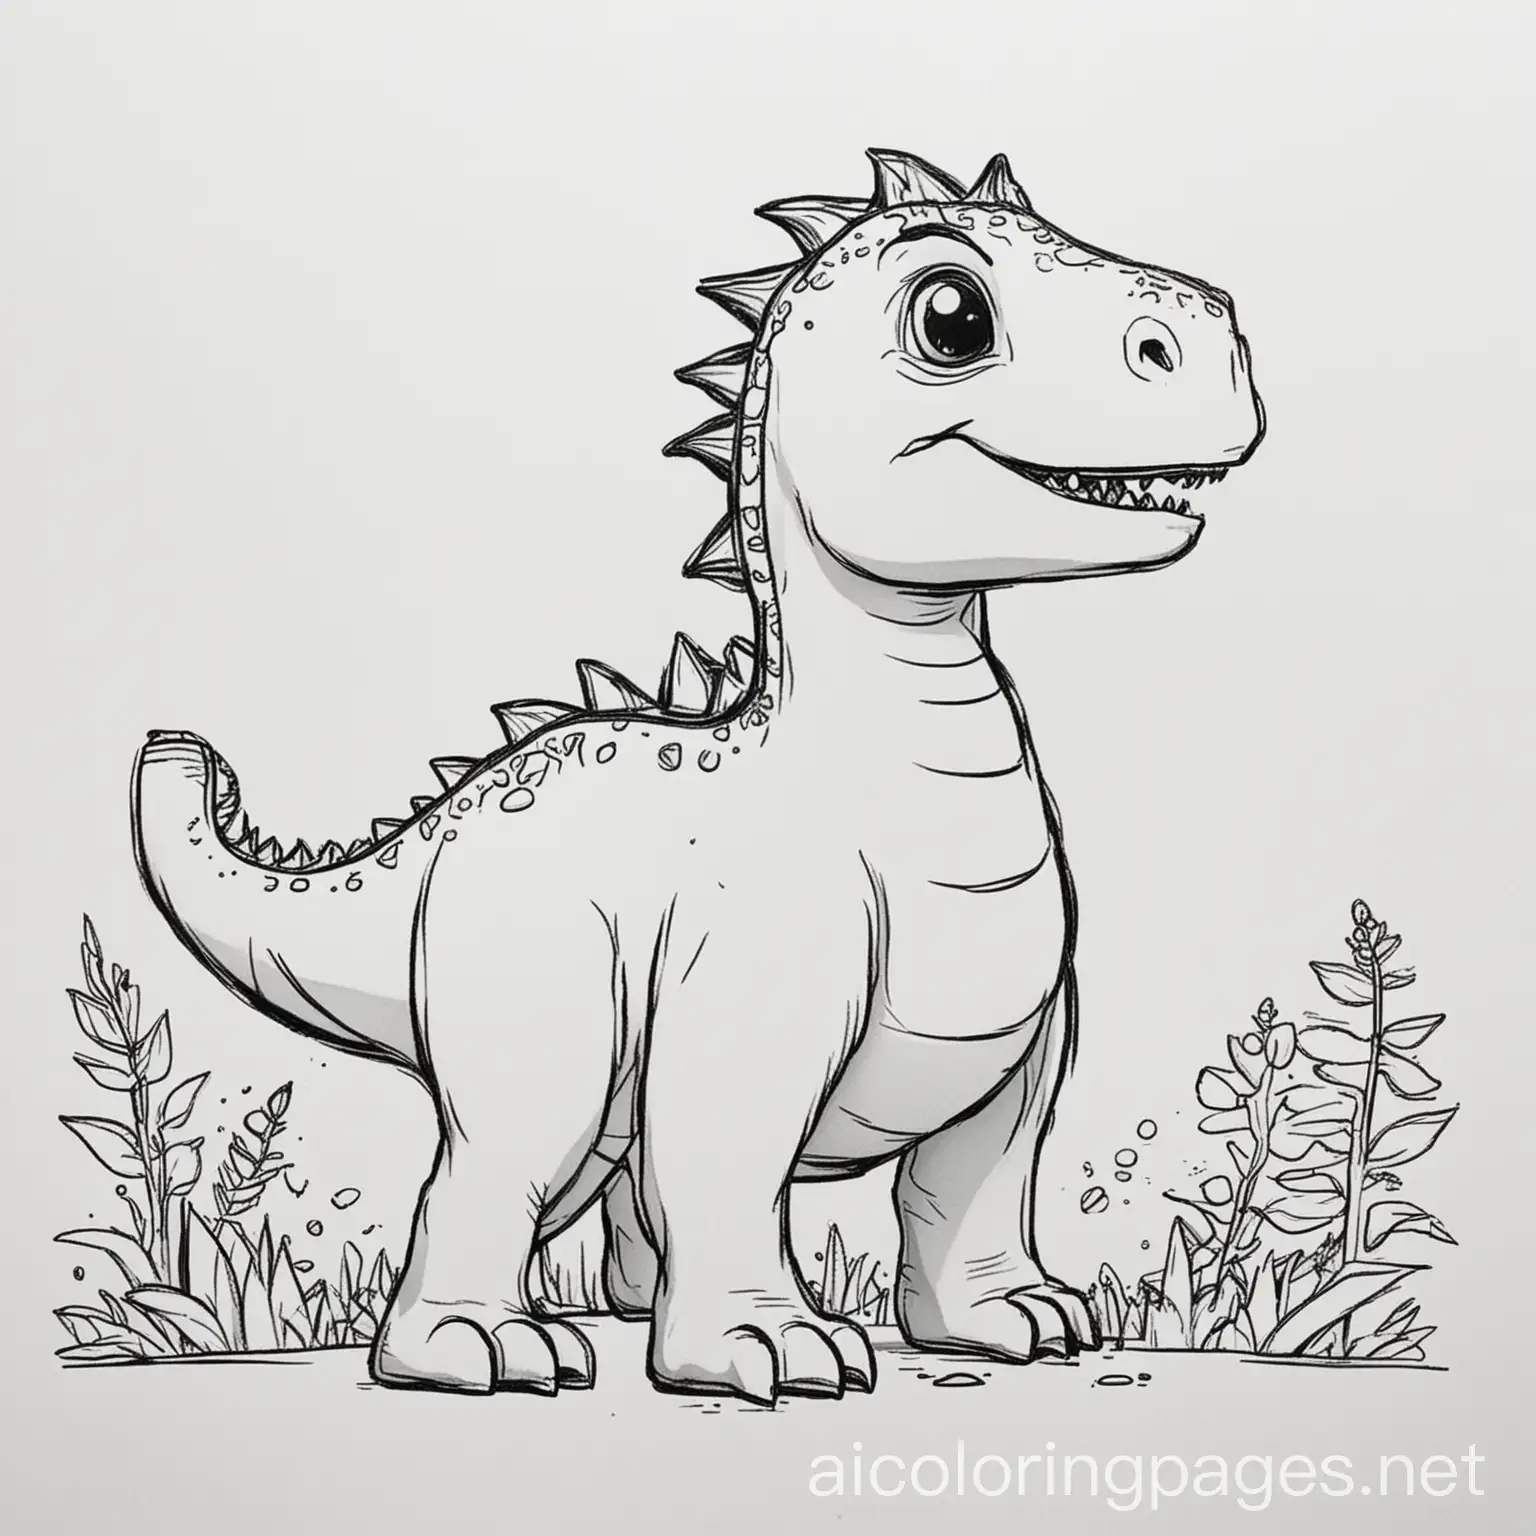 Dinasor, Coloring Page, black and white, line art, white background, Simplicity, Ample White Space. The background of the coloring page is plain white to make it easy for young children to color within the lines. The outlines of all the subjects are easy to distinguish, making it simple for kids to color without too much difficulty